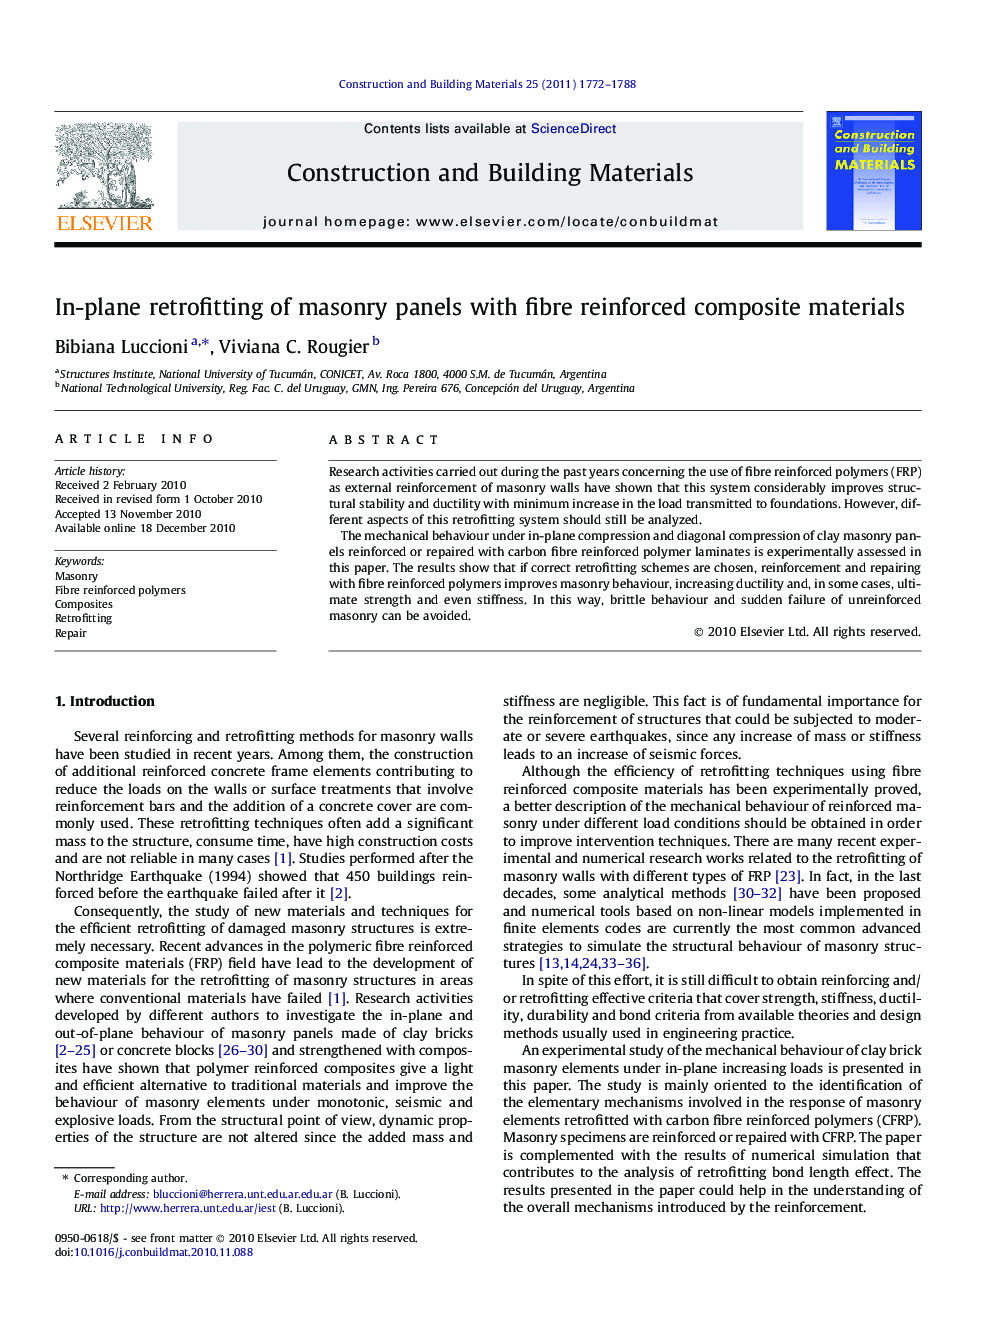 In-plane retrofitting of masonry panels with fibre reinforced composite materials